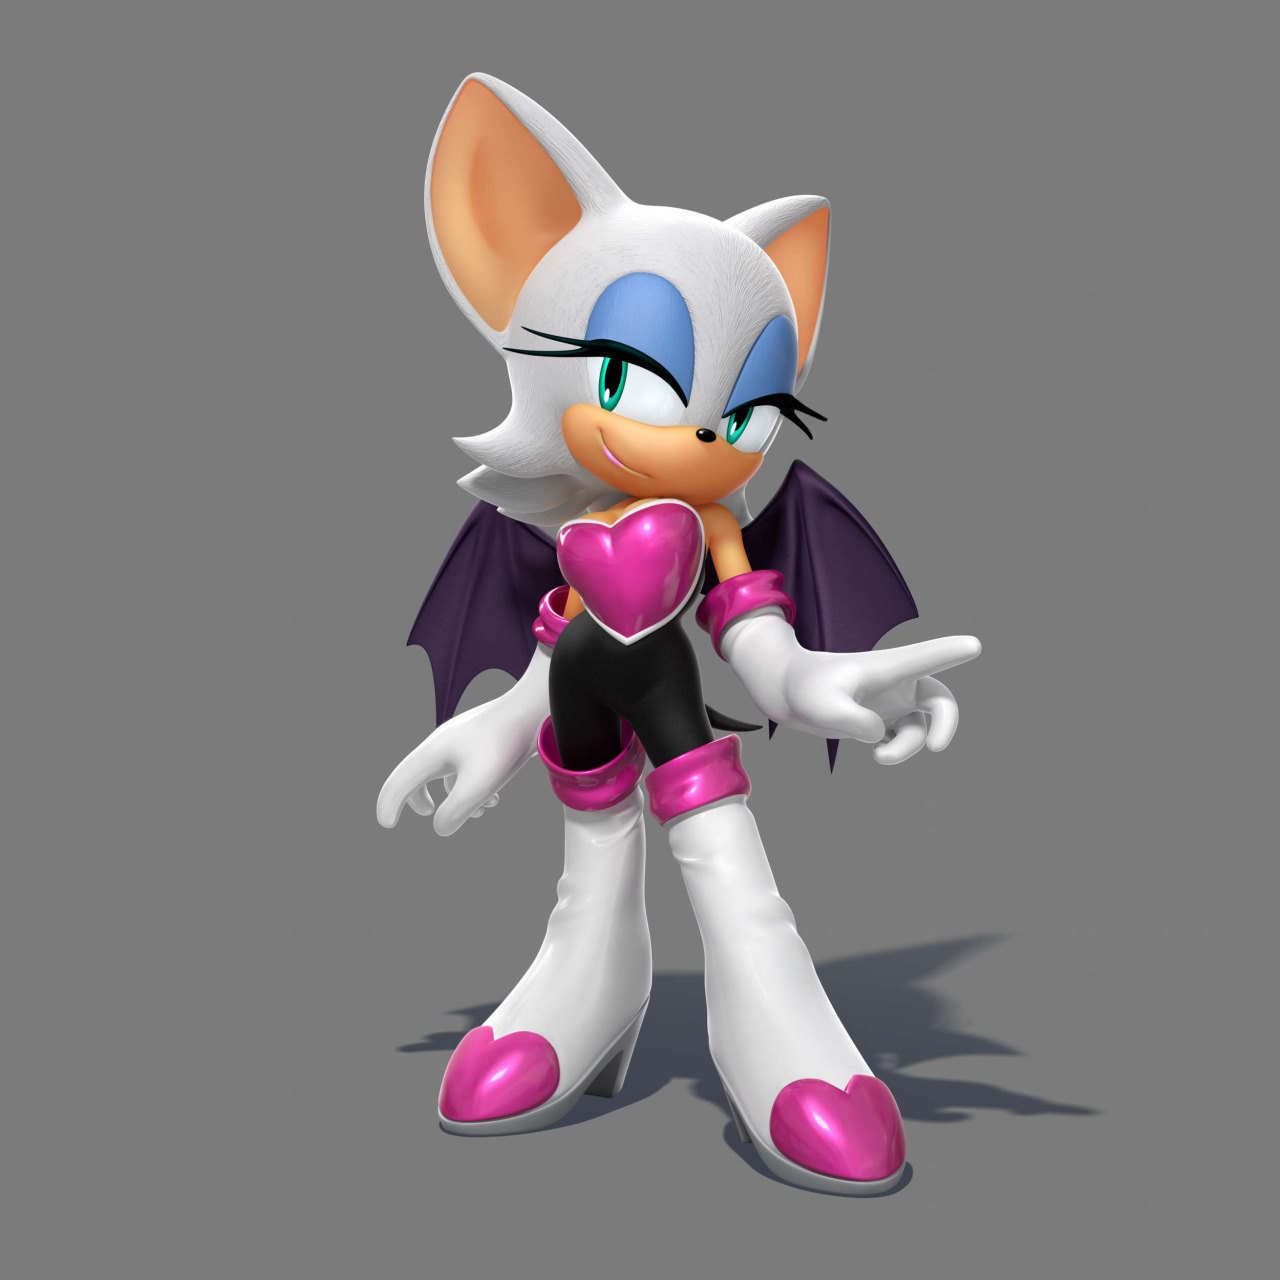 delaynez:  Amy Rose, Blaze the Cat, Rouge the Bat, and Sticks the Badger in Mario